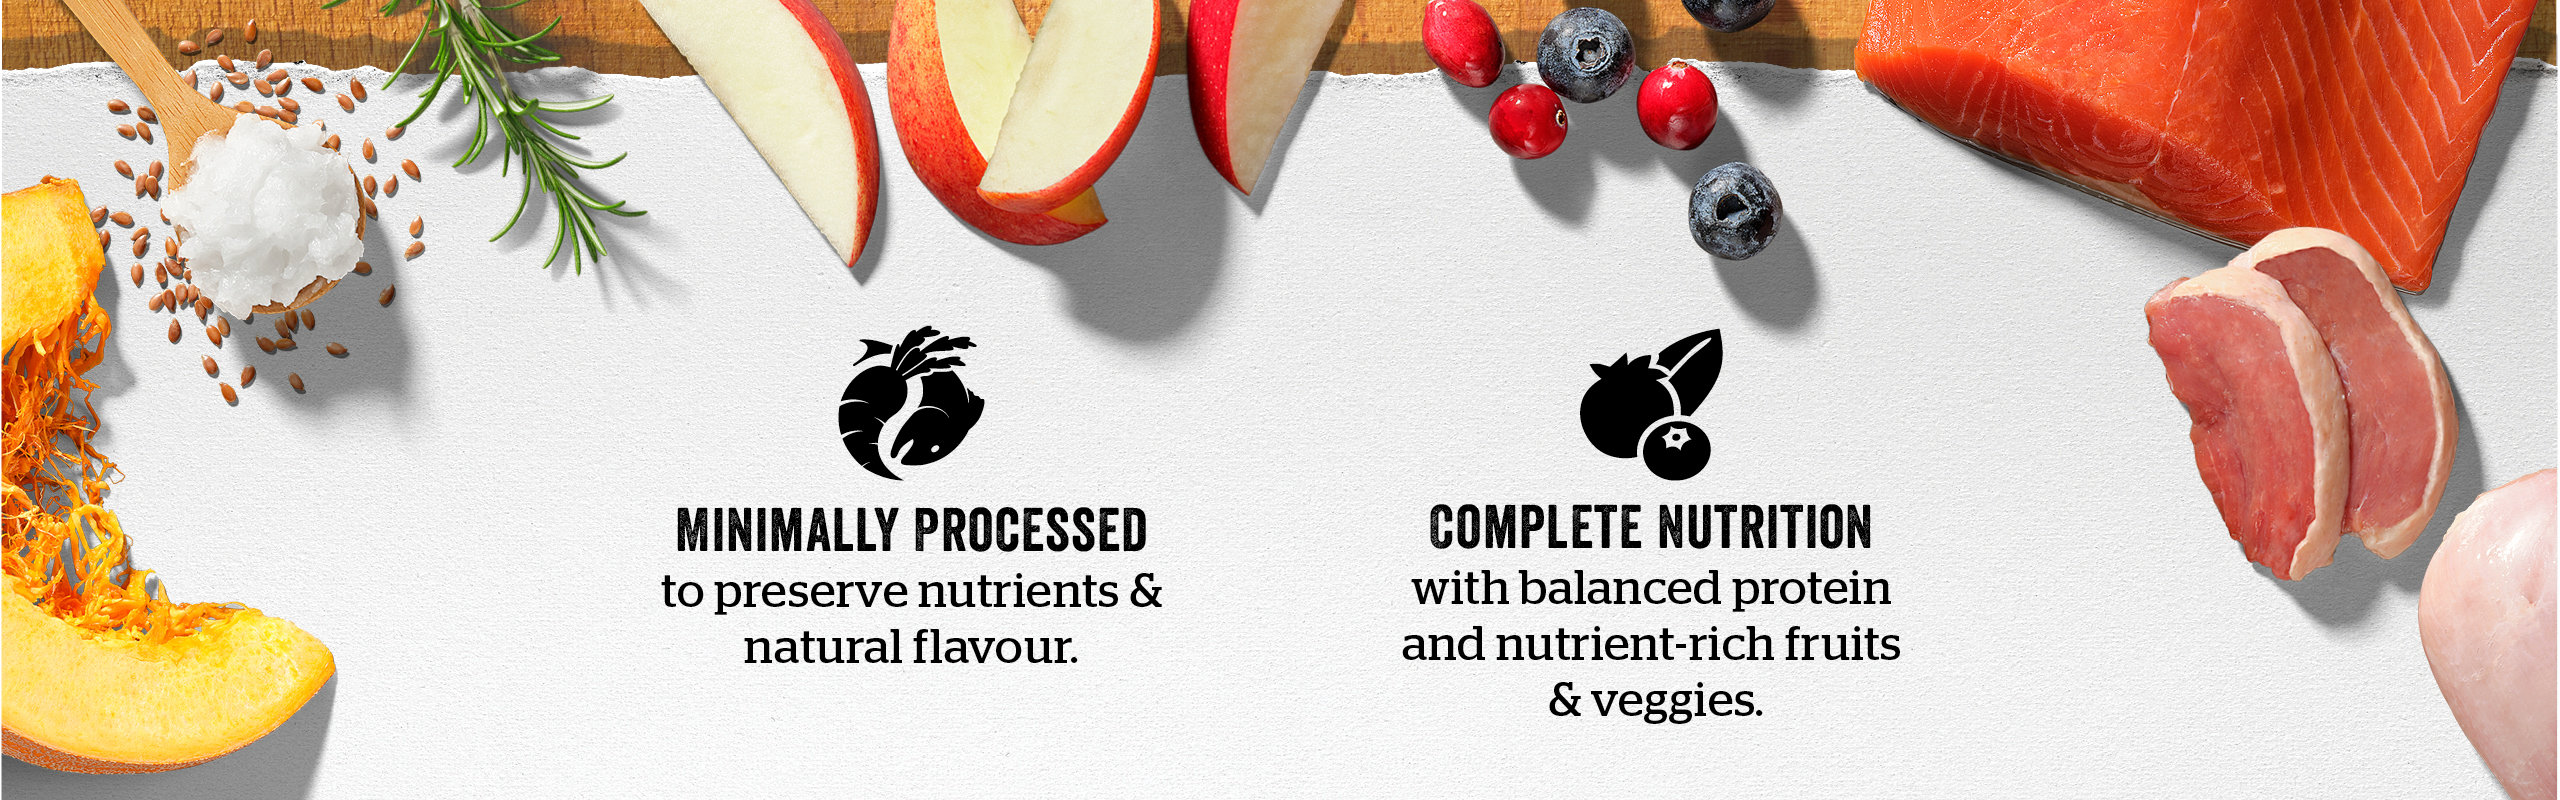 Minimally Processed and complete nutrition